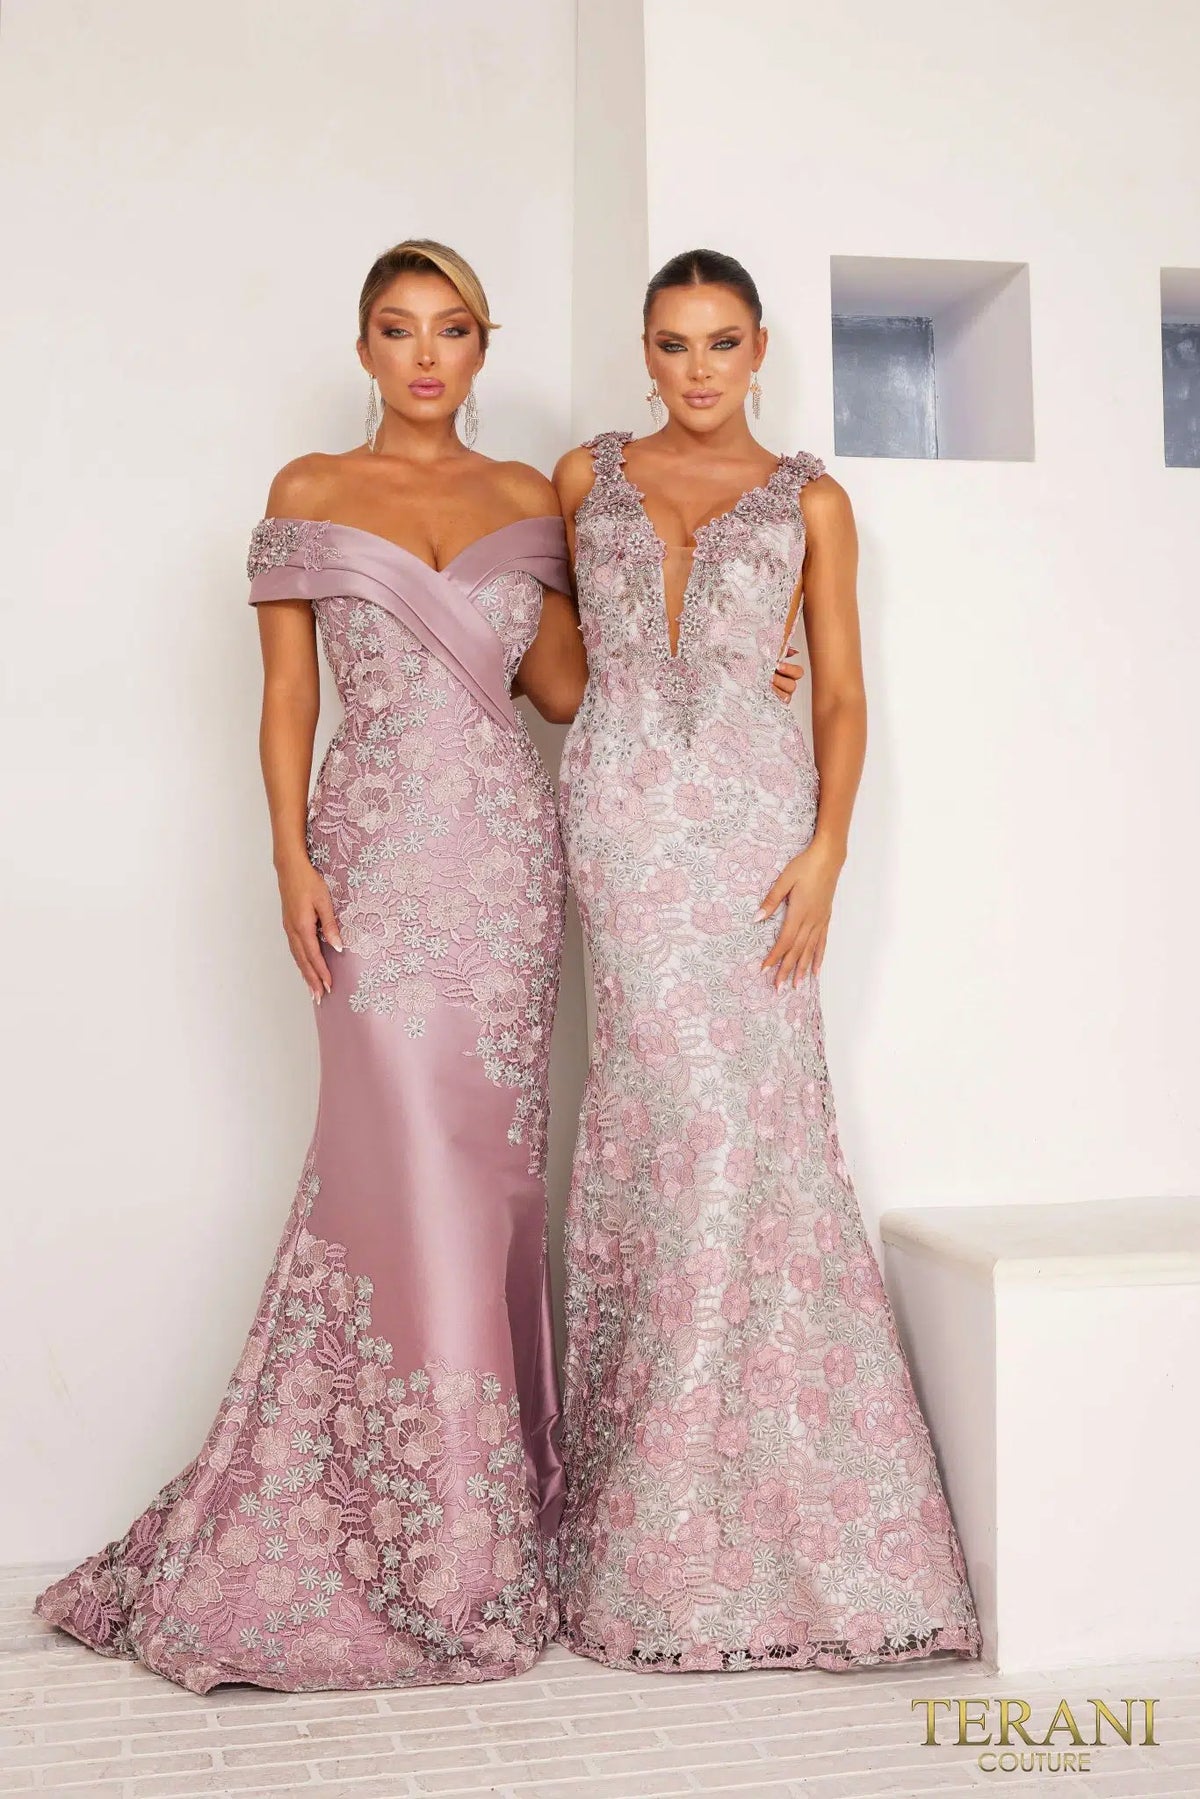 Terani 241E2410 - A sparkling rose floral embroidery trumpet evening gown, perfect for making a sophisticated statement at special events. The other dress in the picture is Terani 241M2701.